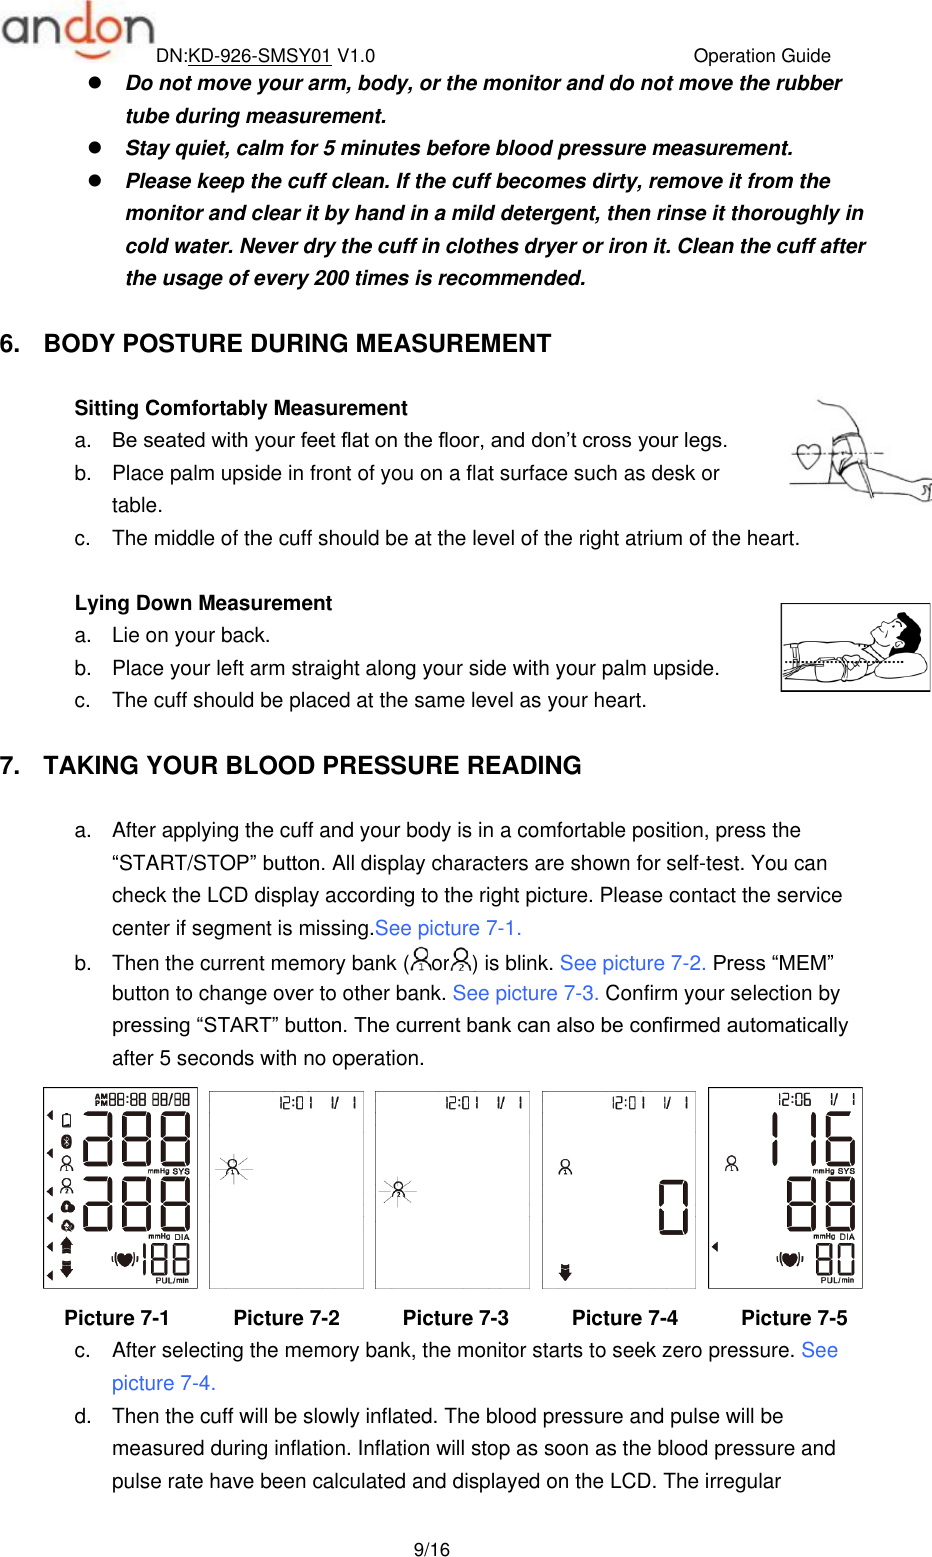 DN:KD-926-SMSY01 V1.0                                  Operation Guide  9/16  Do not move your arm, body, or the monitor and do not move the rubber tube during measurement.  Stay quiet, calm for 5 minutes before blood pressure measurement.  Please keep the cuff clean. If the cuff becomes dirty, remove it from the monitor and clear it by hand in a mild detergent, then rinse it thoroughly in cold water. Never dry the cuff in clothes dryer or iron it. Clean the cuff after the usage of every 200 times is recommended.      6.  BODY POSTURE DURING MEASUREMENT  Sitting Comfortably Measurement a. Be seated with your feet flat on the floor, and don’t cross your legs.   b.  Place palm upside in front of you on a flat surface such as desk or table. c.  The middle of the cuff should be at the level of the right atrium of the heart.    Lying Down Measurement a.  Lie on your back.   b.  Place your left arm straight along your side with your palm upside. c.  The cuff should be placed at the same level as your heart.  7.  TAKING YOUR BLOOD PRESSURE READING  a.  After applying the cuff and your body is in a comfortable position, press the “START/STOP” button. All display characters are shown for self-test. You can check the LCD display according to the right picture. Please contact the service center if segment is missing.See picture 7-1. b.  Then the current memory bank ( or ) is blink. See picture 7-2. Press “MEM” button to change over to other bank. See picture 7-3. Confirm your selection by pressing “START” button. The current bank can also be confirmed automatically after 5 seconds with no operation.            Picture 7-1            Picture 7-2            Picture 7-3            Picture 7-4            Picture 7-5 c.  After selecting the memory bank, the monitor starts to seek zero pressure. See picture 7-4. d.  Then the cuff will be slowly inflated. The blood pressure and pulse will be measured during inflation. Inflation will stop as soon as the blood pressure and pulse rate have been calculated and displayed on the LCD. The irregular 